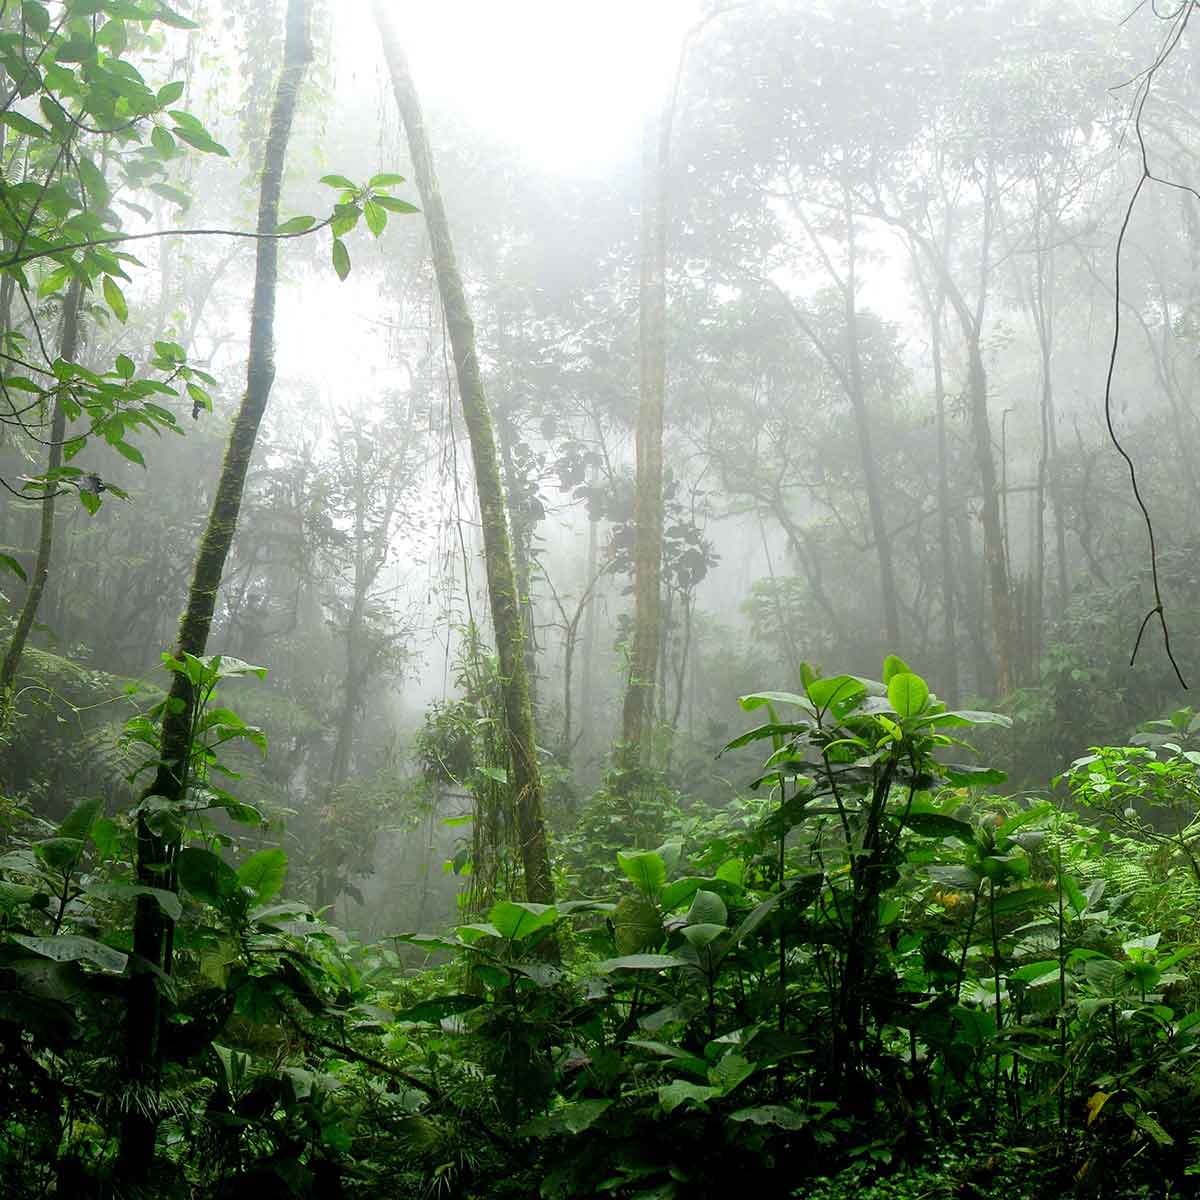 Why Are Amazon Forests Important to the World?